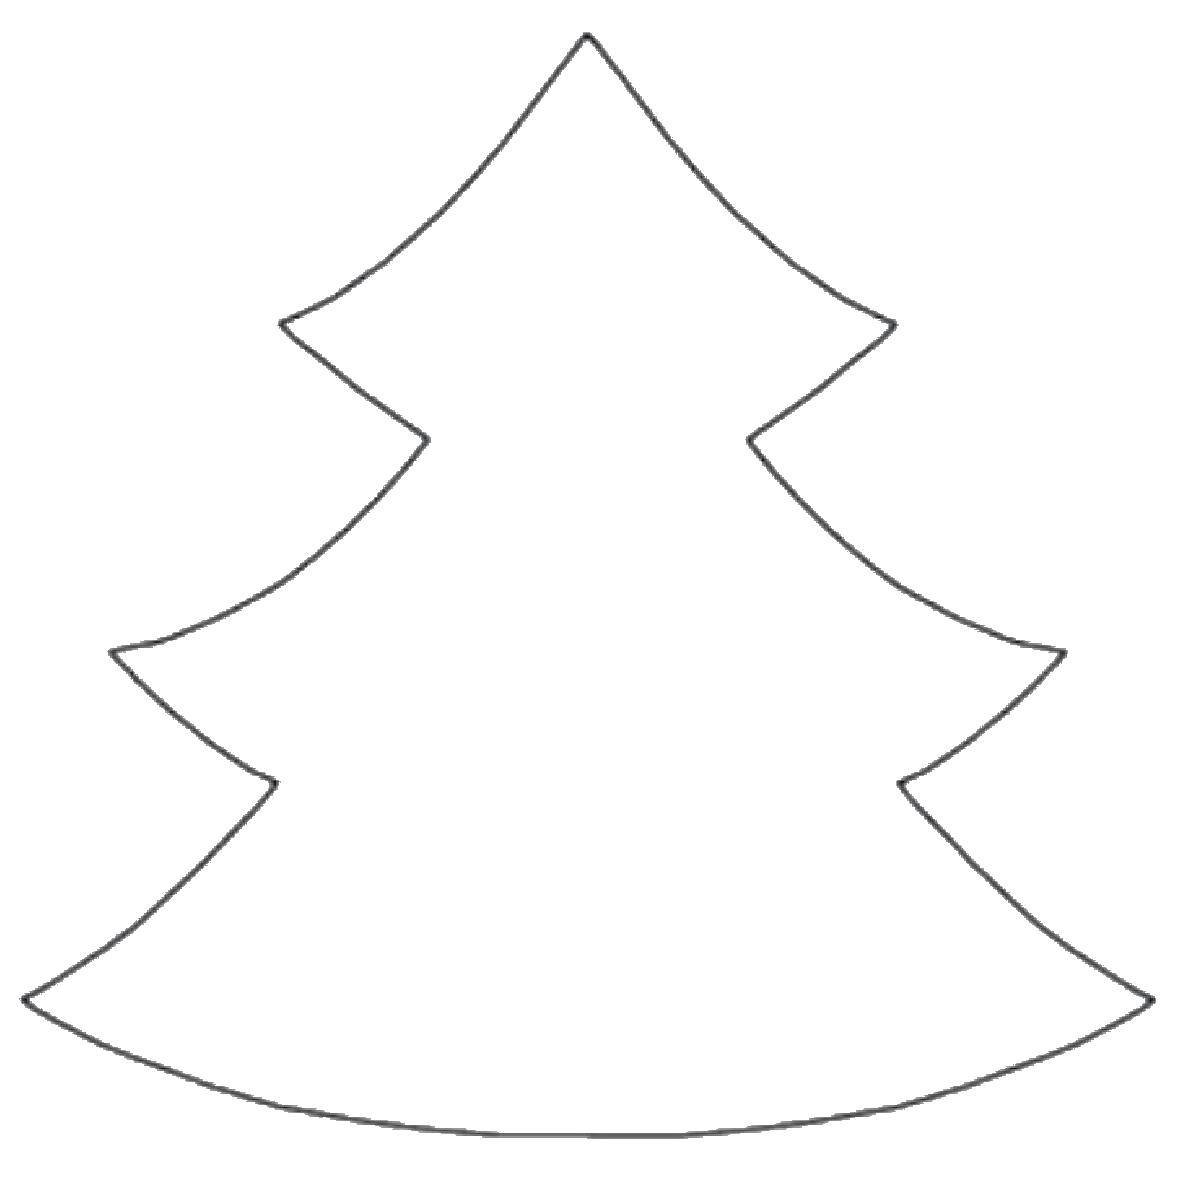 Coloring The outline of the tree. Category The contour of the tree. Tags:  counter, tree.